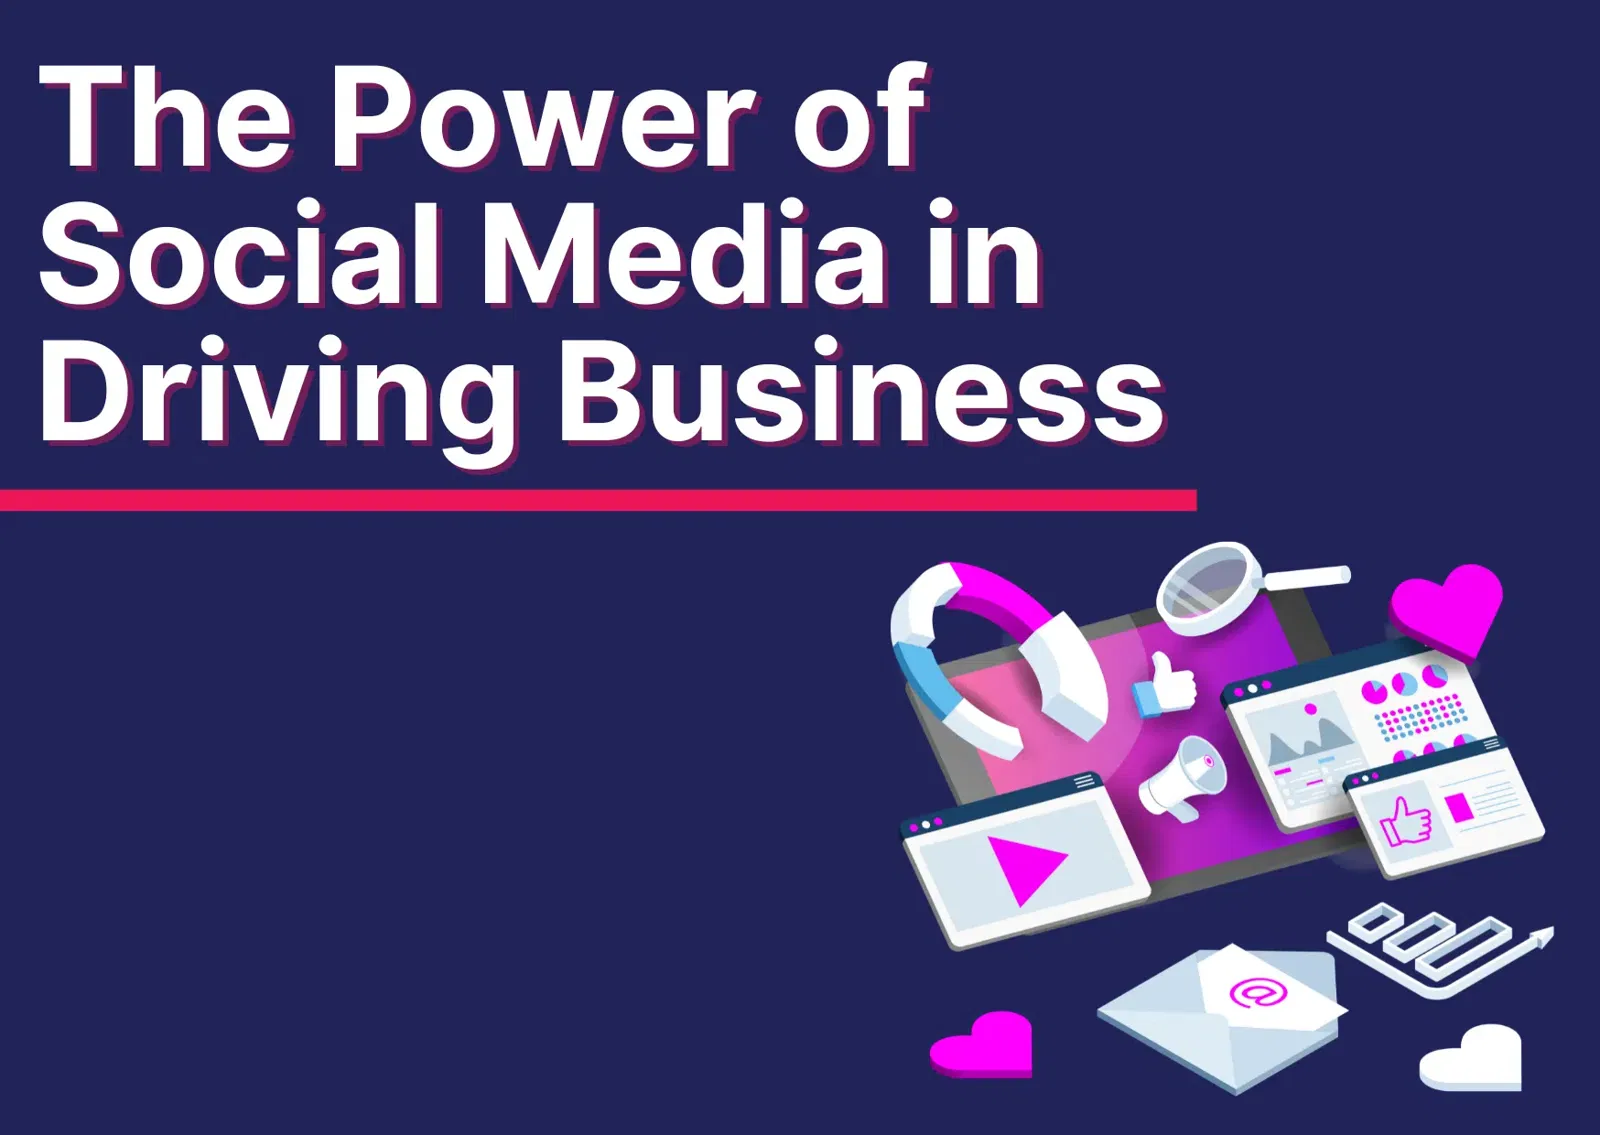 The Power of Social Media in Driving Business